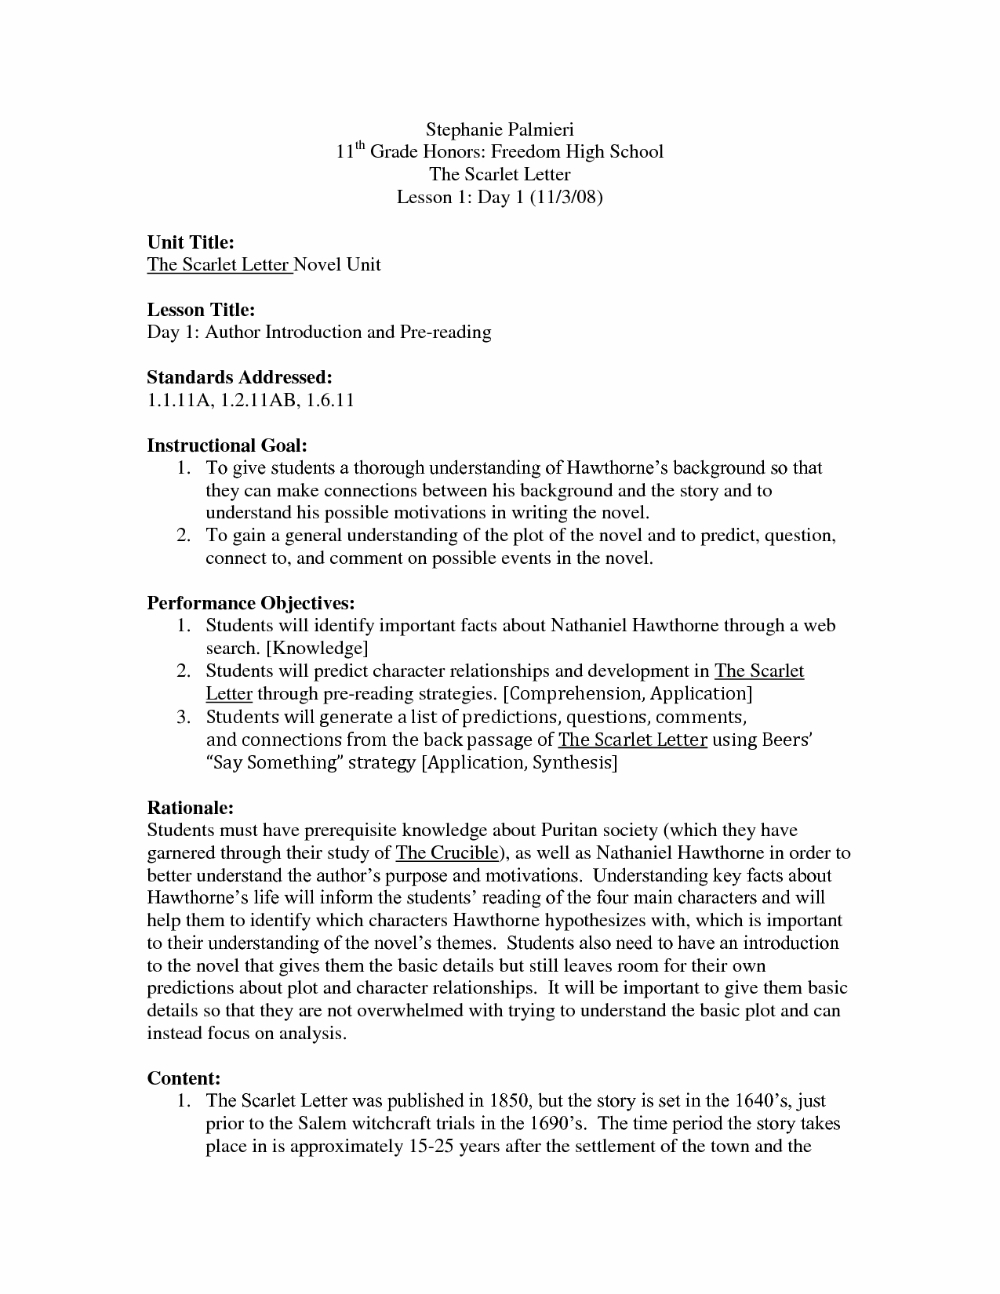 Recommendation Letter Template To A Judge Ten Great Nyfamily inside size 1000 X 1294